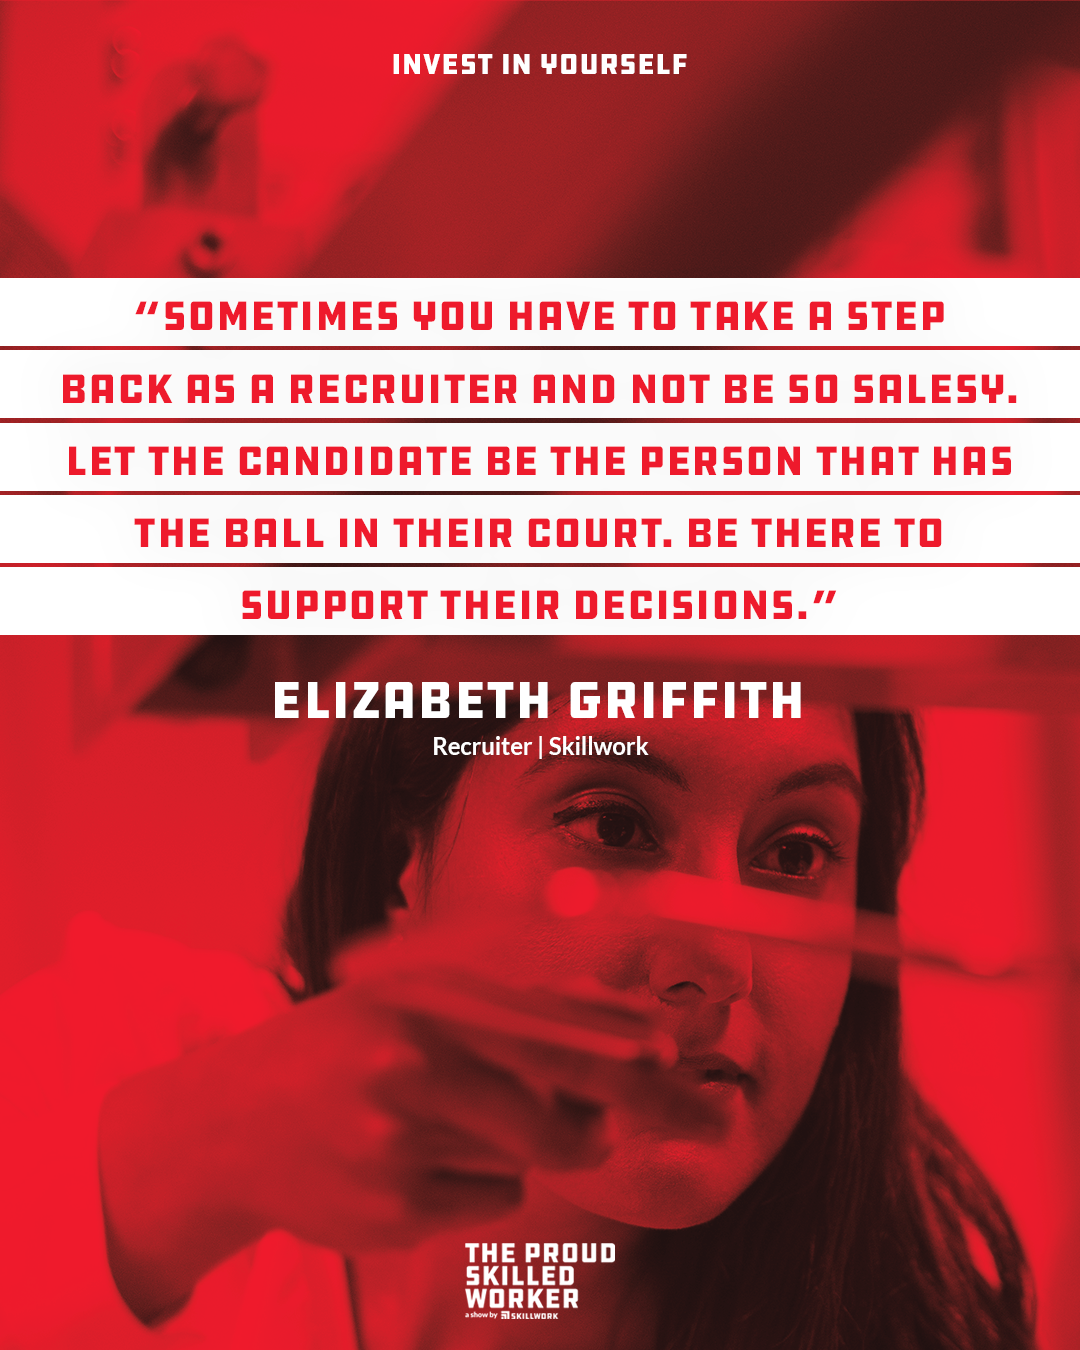 210505_Skillwork_TPSW_Ep_Invest in Yourself with Elizabeth Griffith - Skillwork Recruiter_QG3